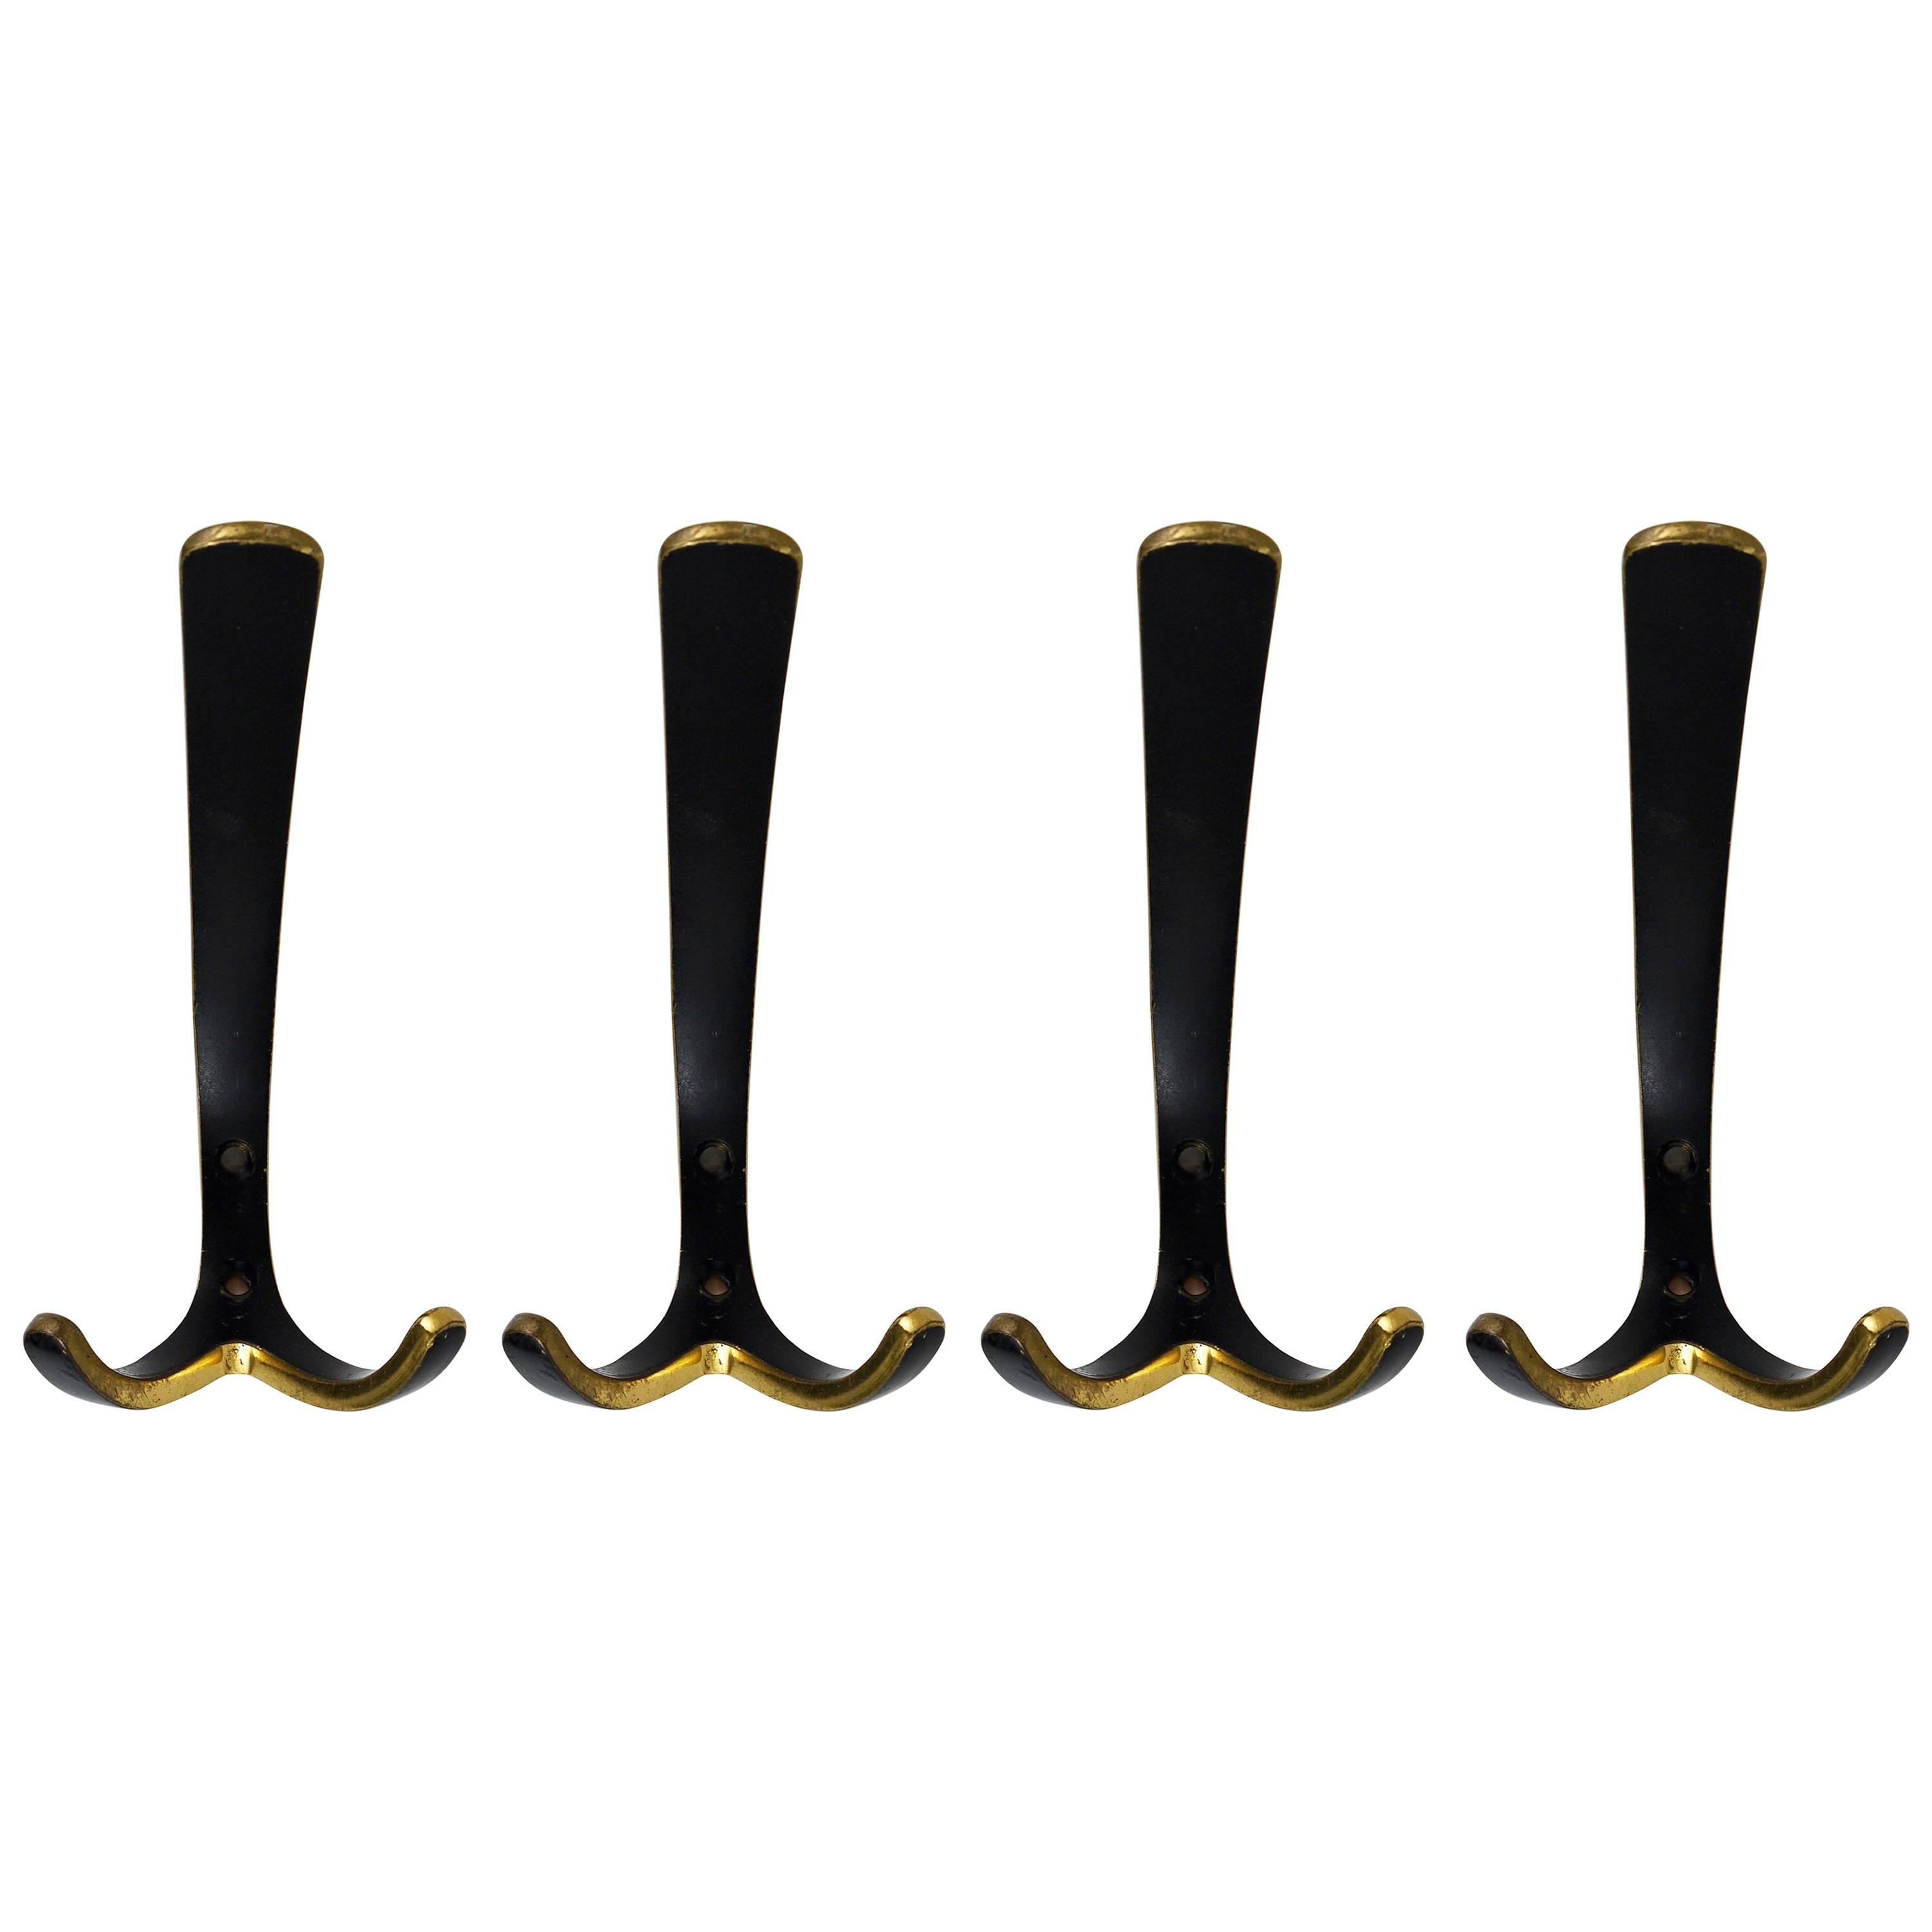 Up to Four Mid-Century Brass Wall Hooks by Hertha Baller, Austria, 1950s